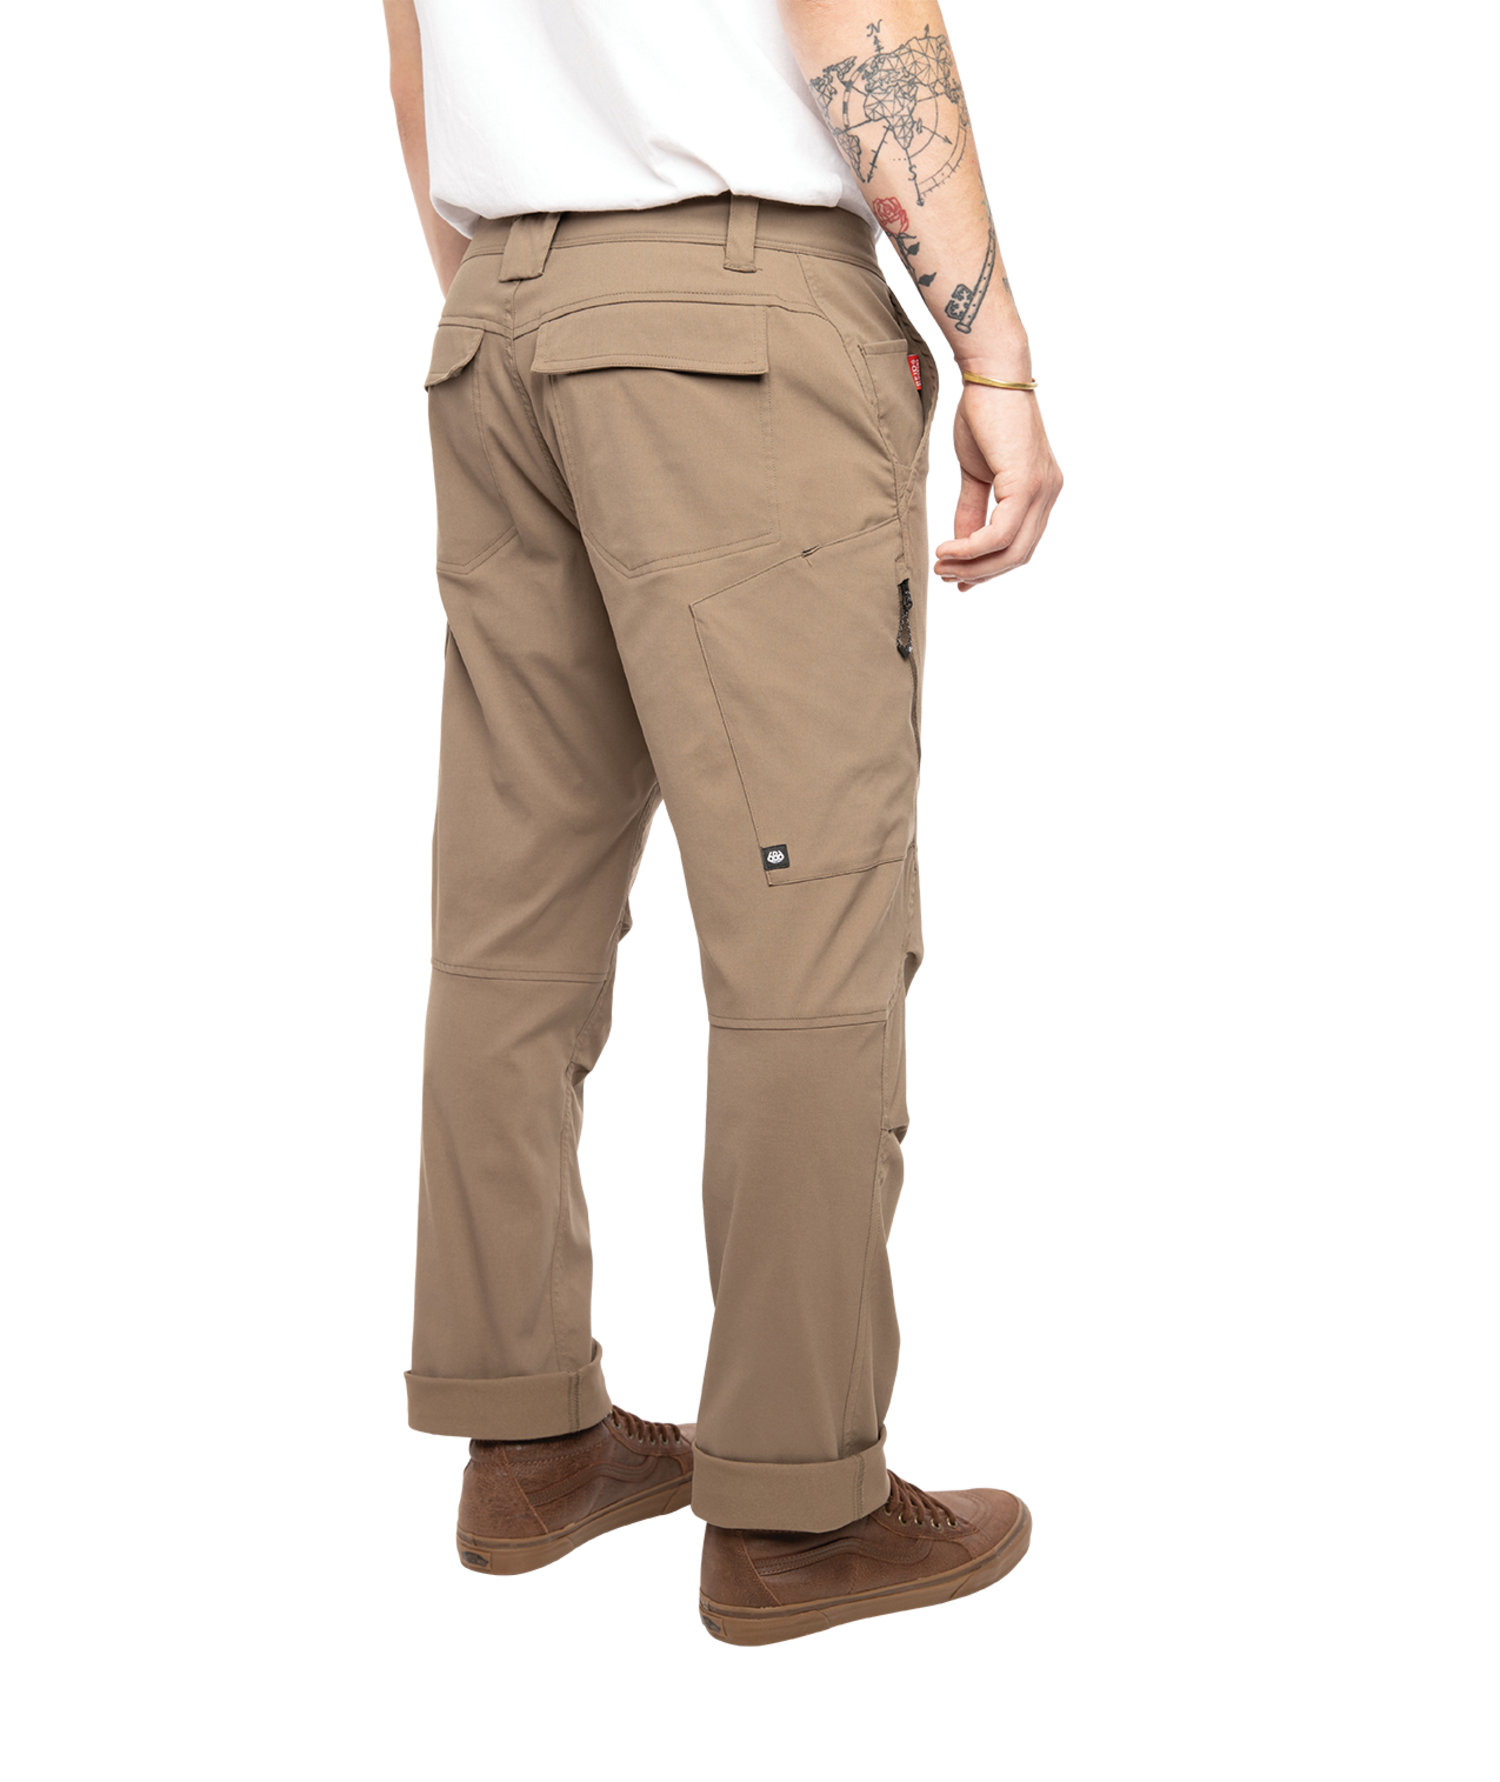 Adjustable cargo pants that fit soo good #find #finds #ama